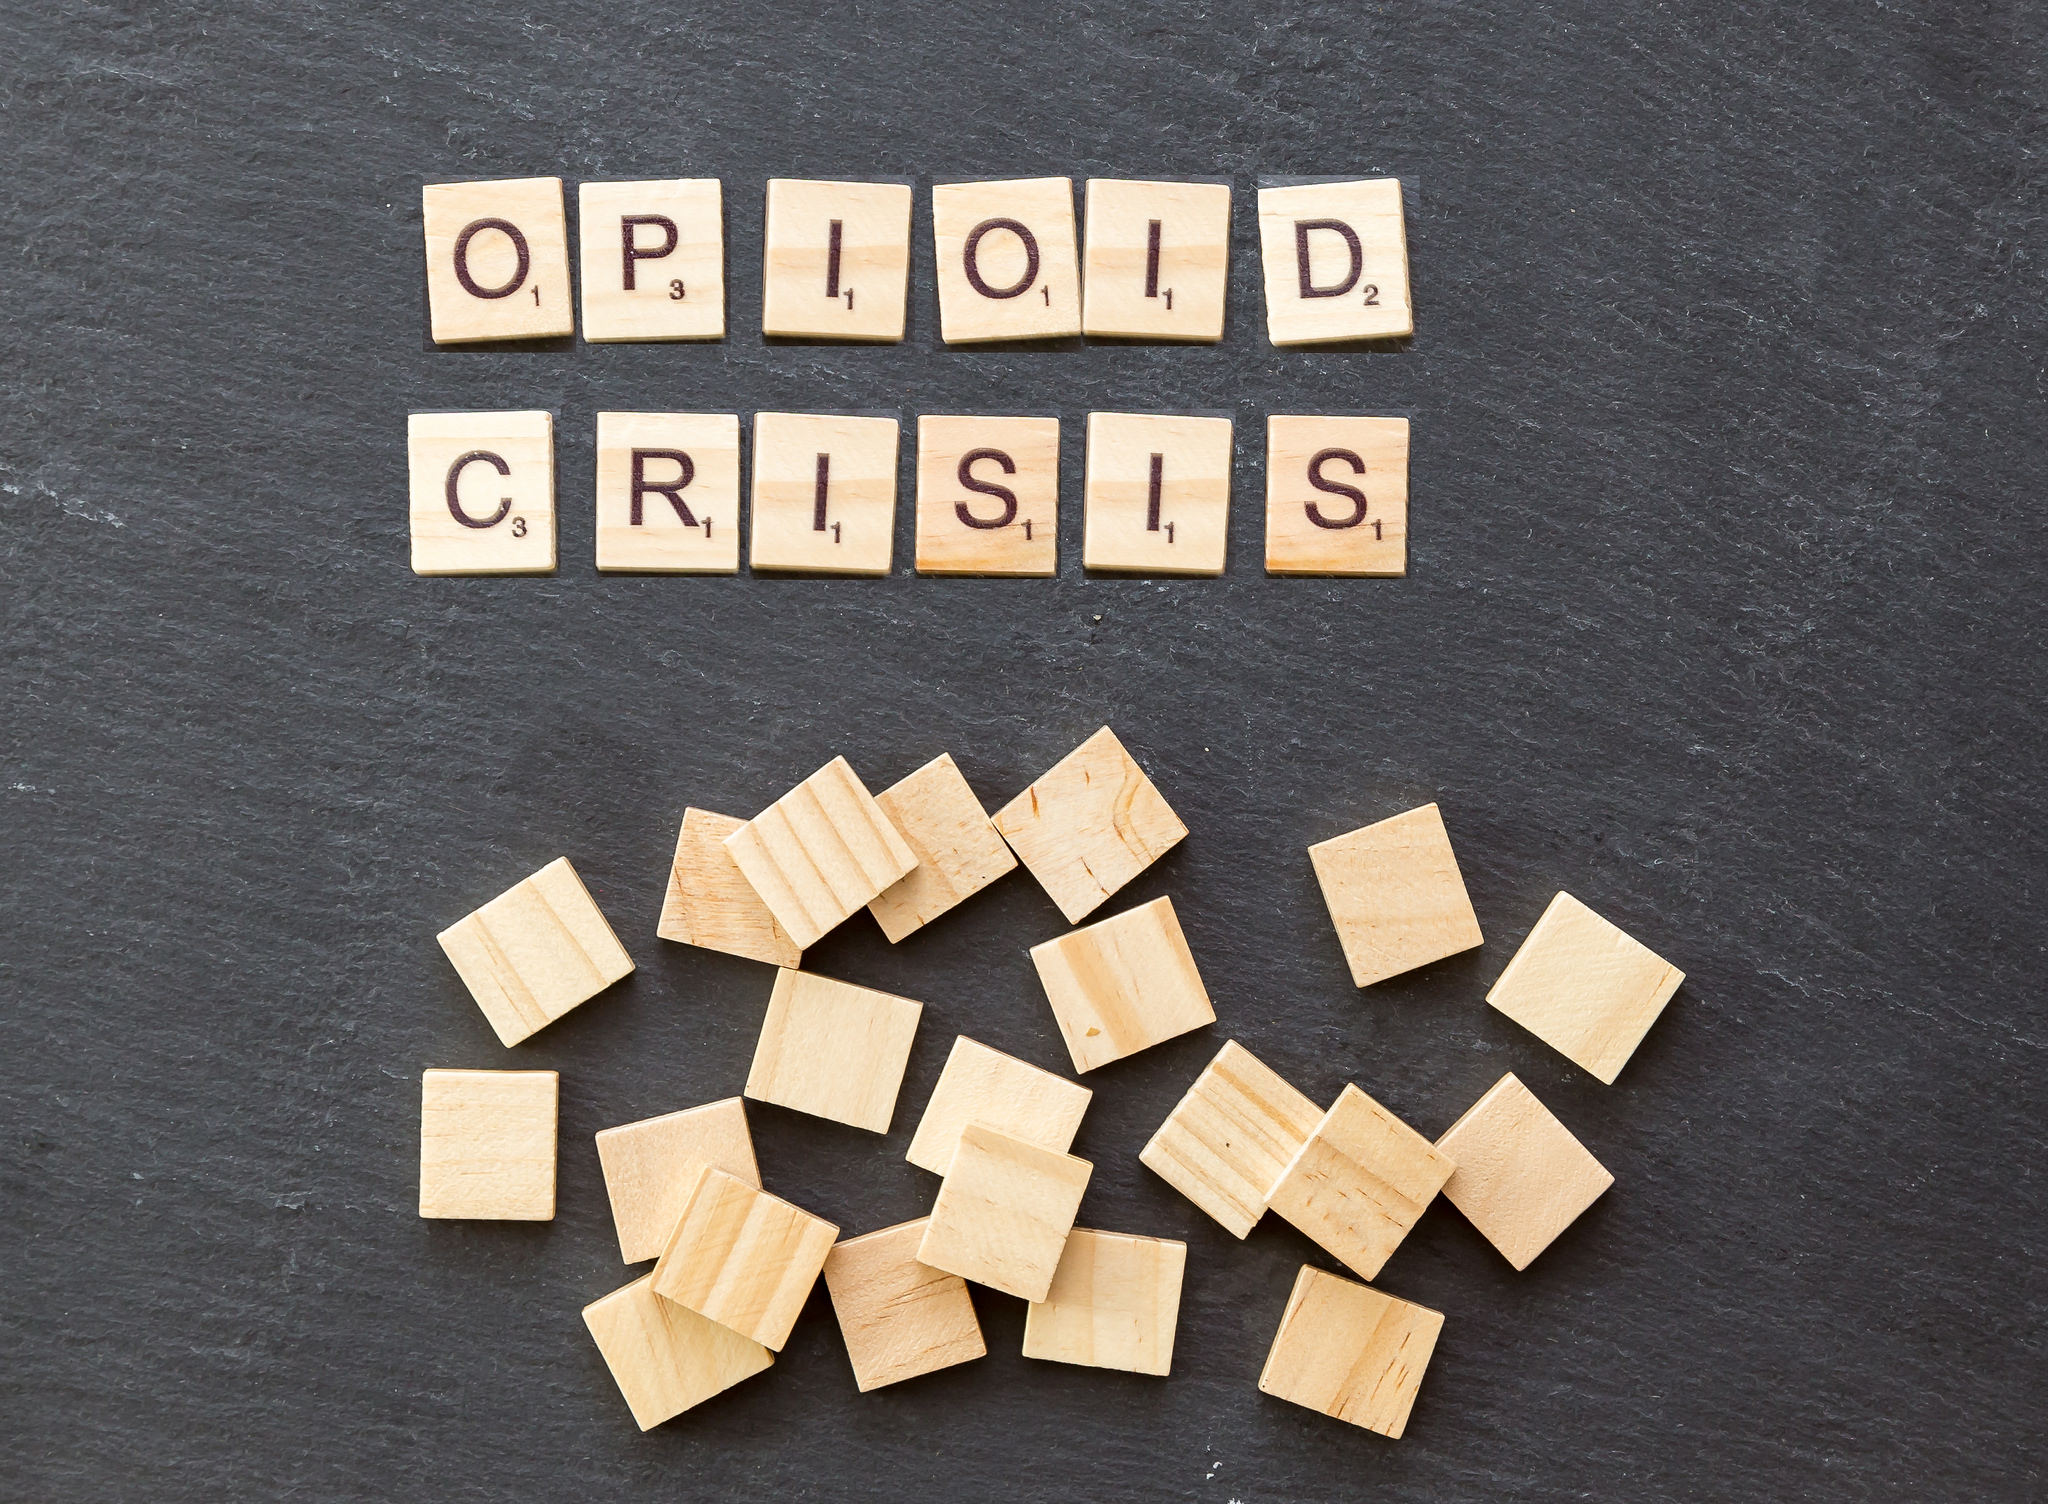 Addressing the Opioid Crisis as a National Emergency